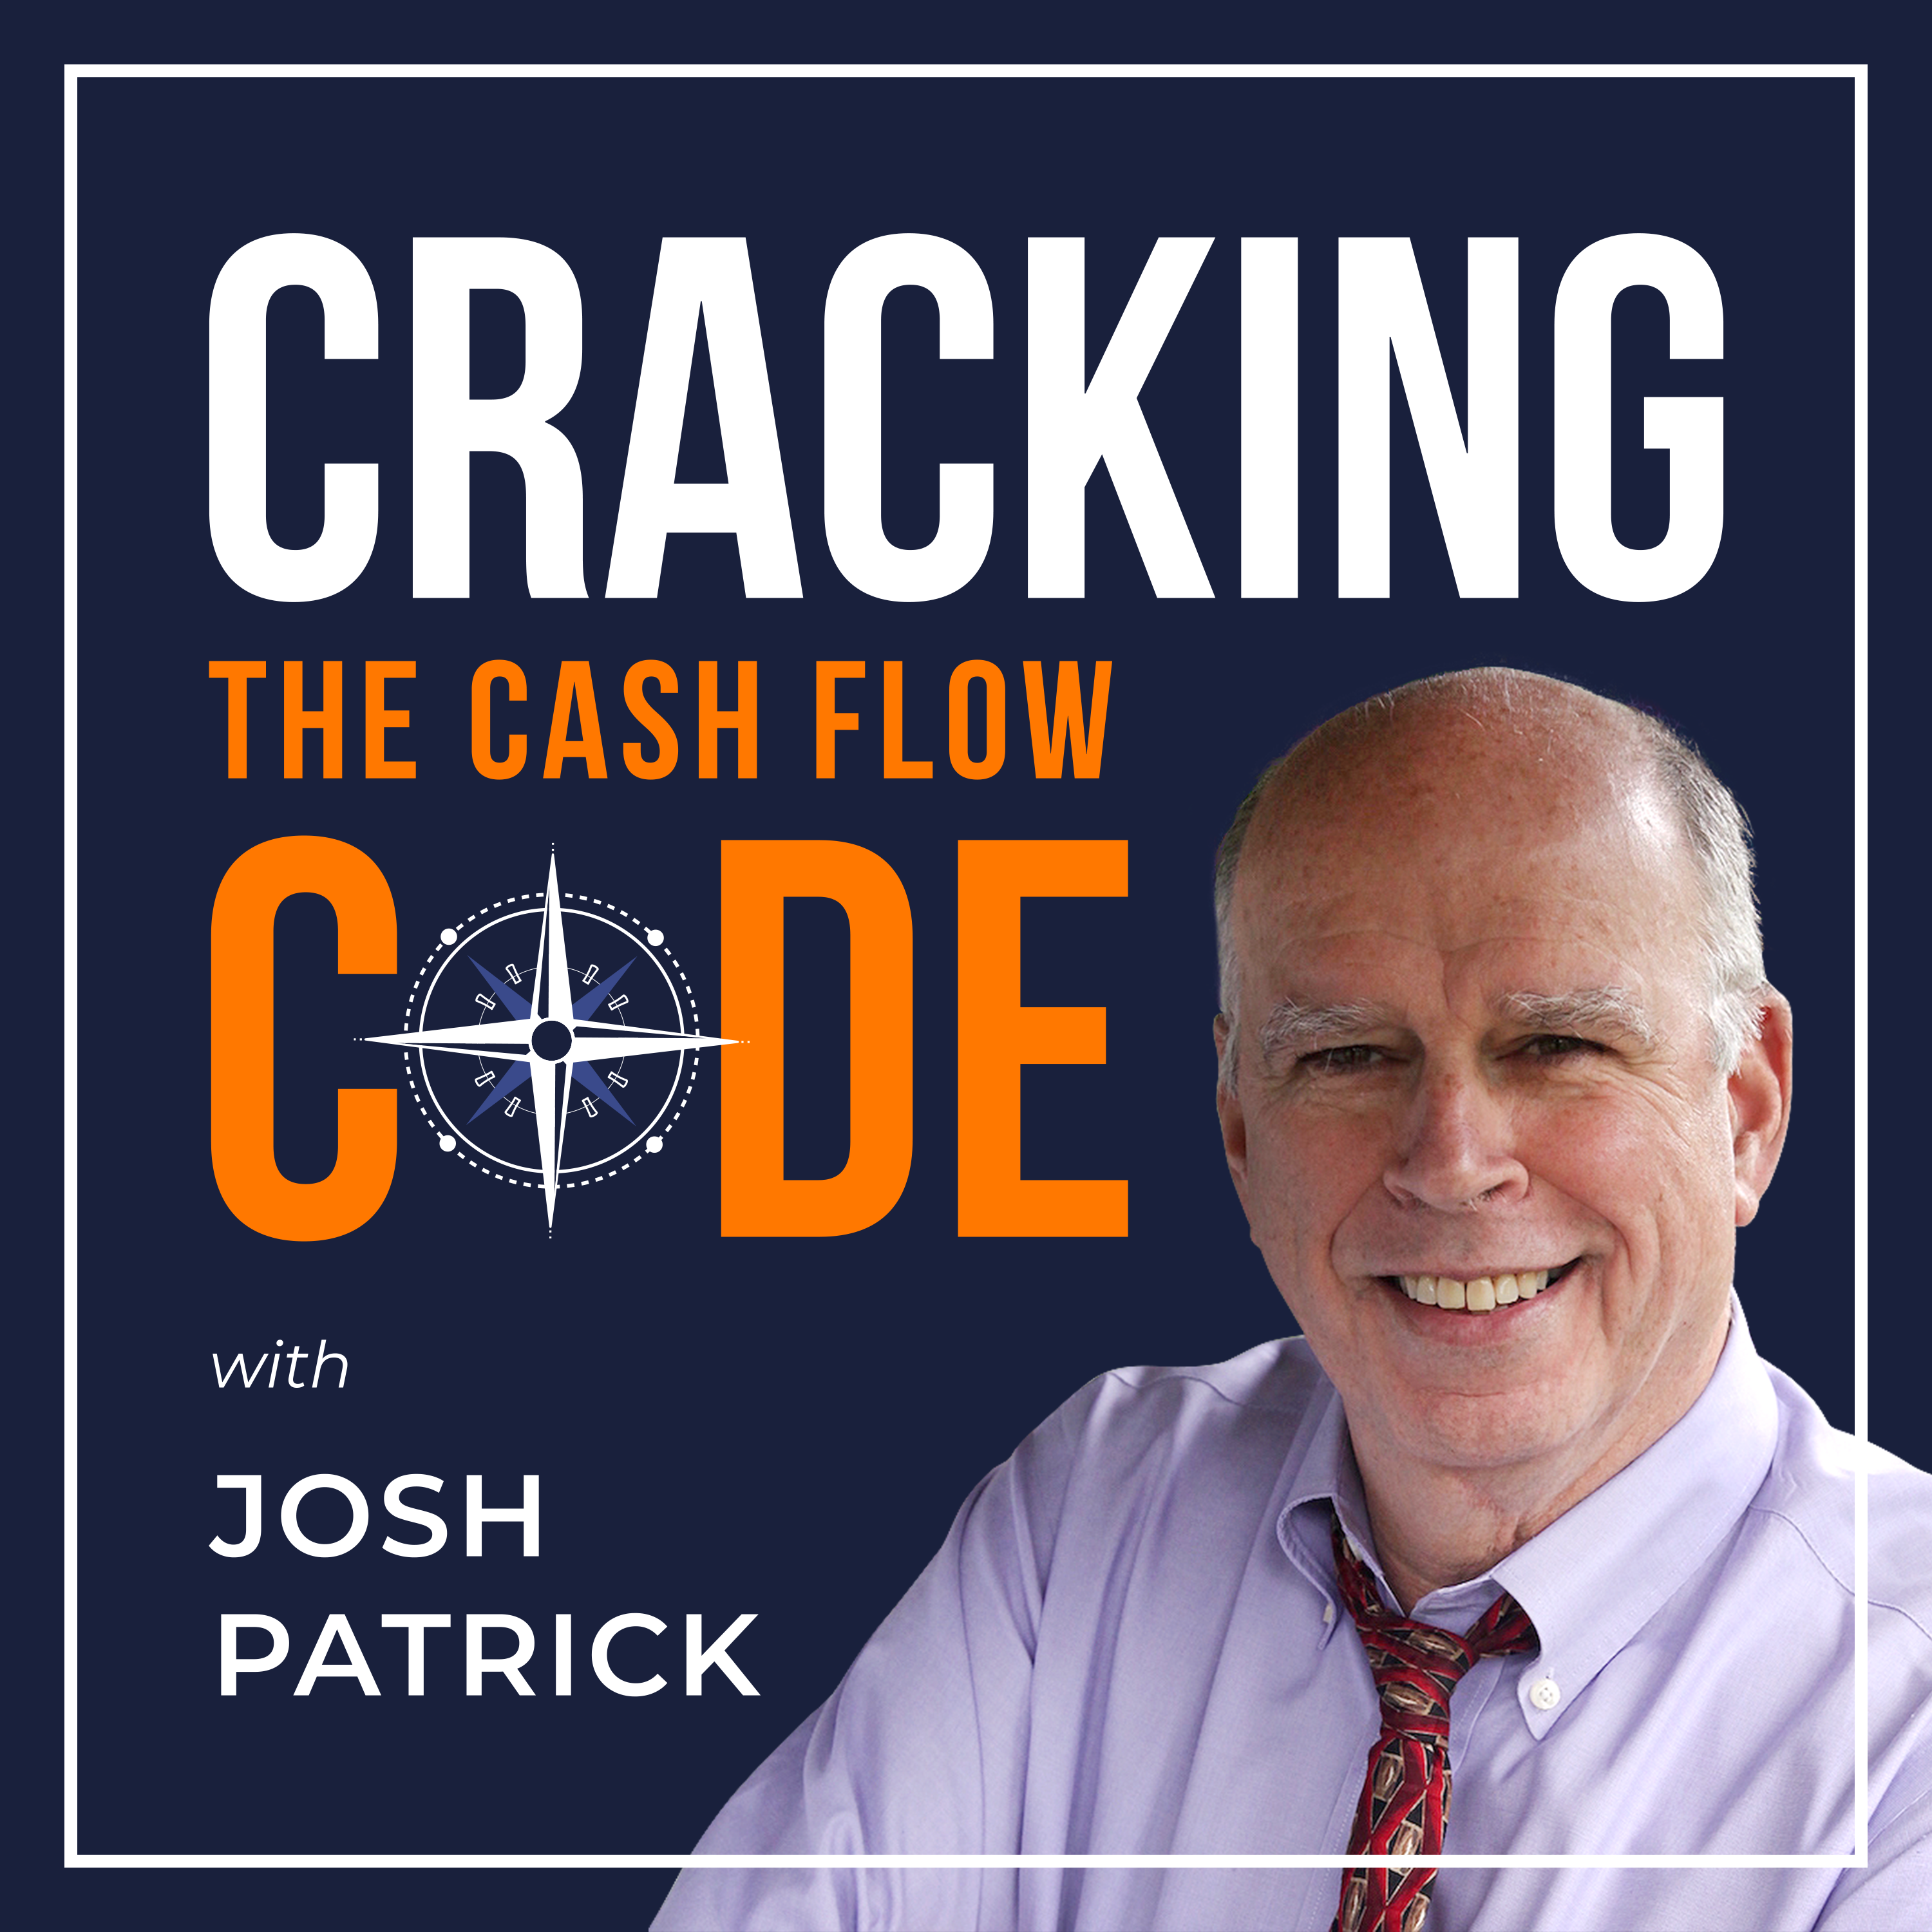 https://danielleclevy.com/wp-content/uploads/2023/02/Cracking_The_Cash_Flow_-_Podcast_Cover.png